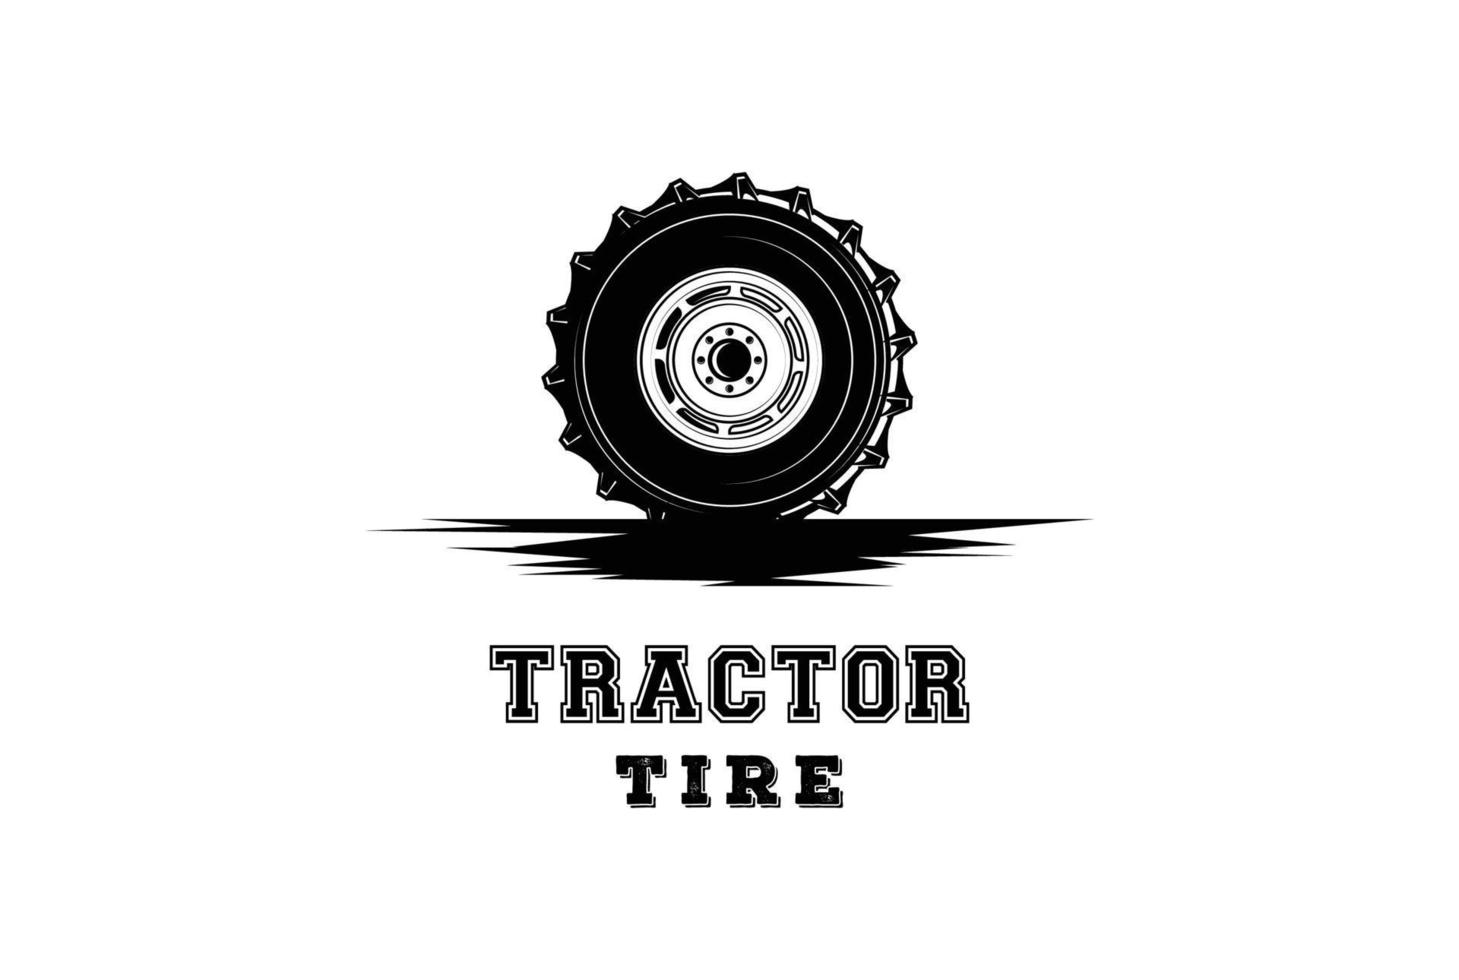 Vintage Heavy Tractor or Mining Vehicle Tire Logo Design vector